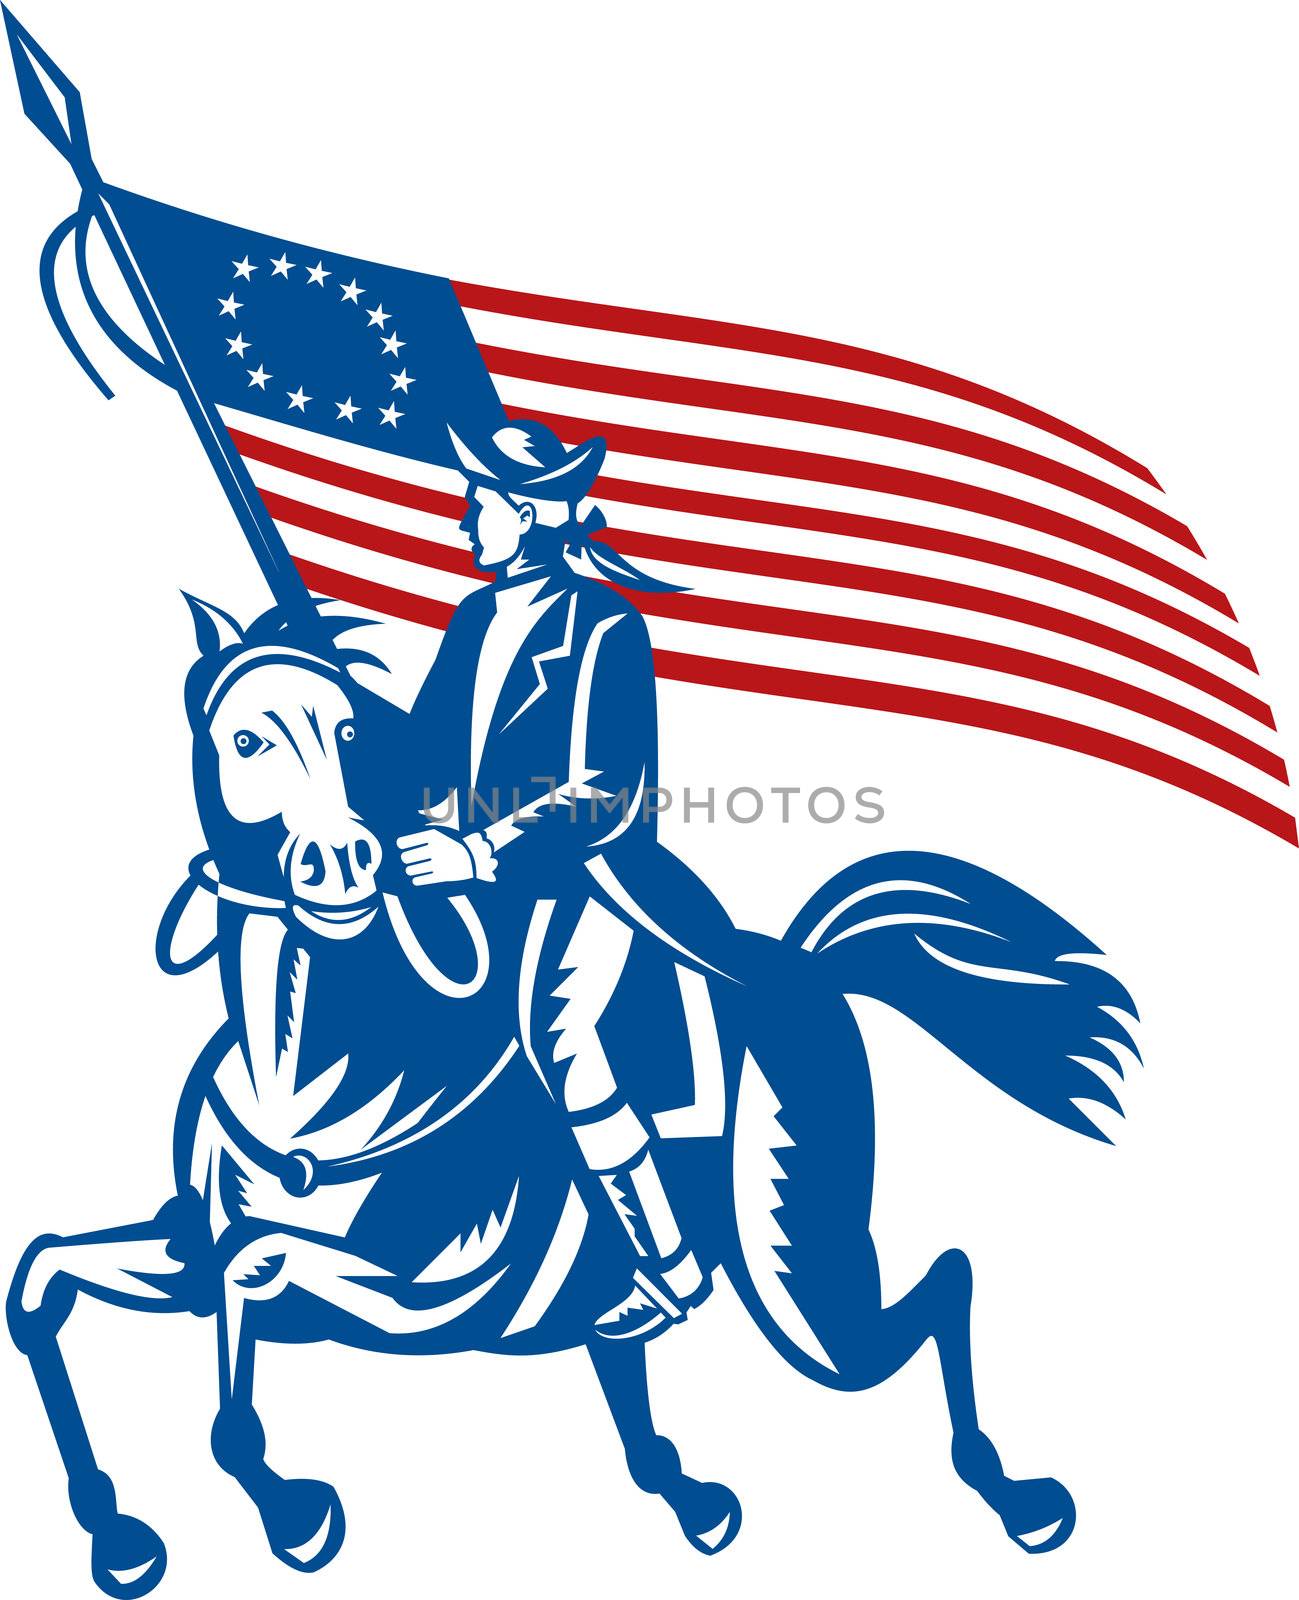 illustration of an American revolutionary general a riding horse with Betsy Ross Flag